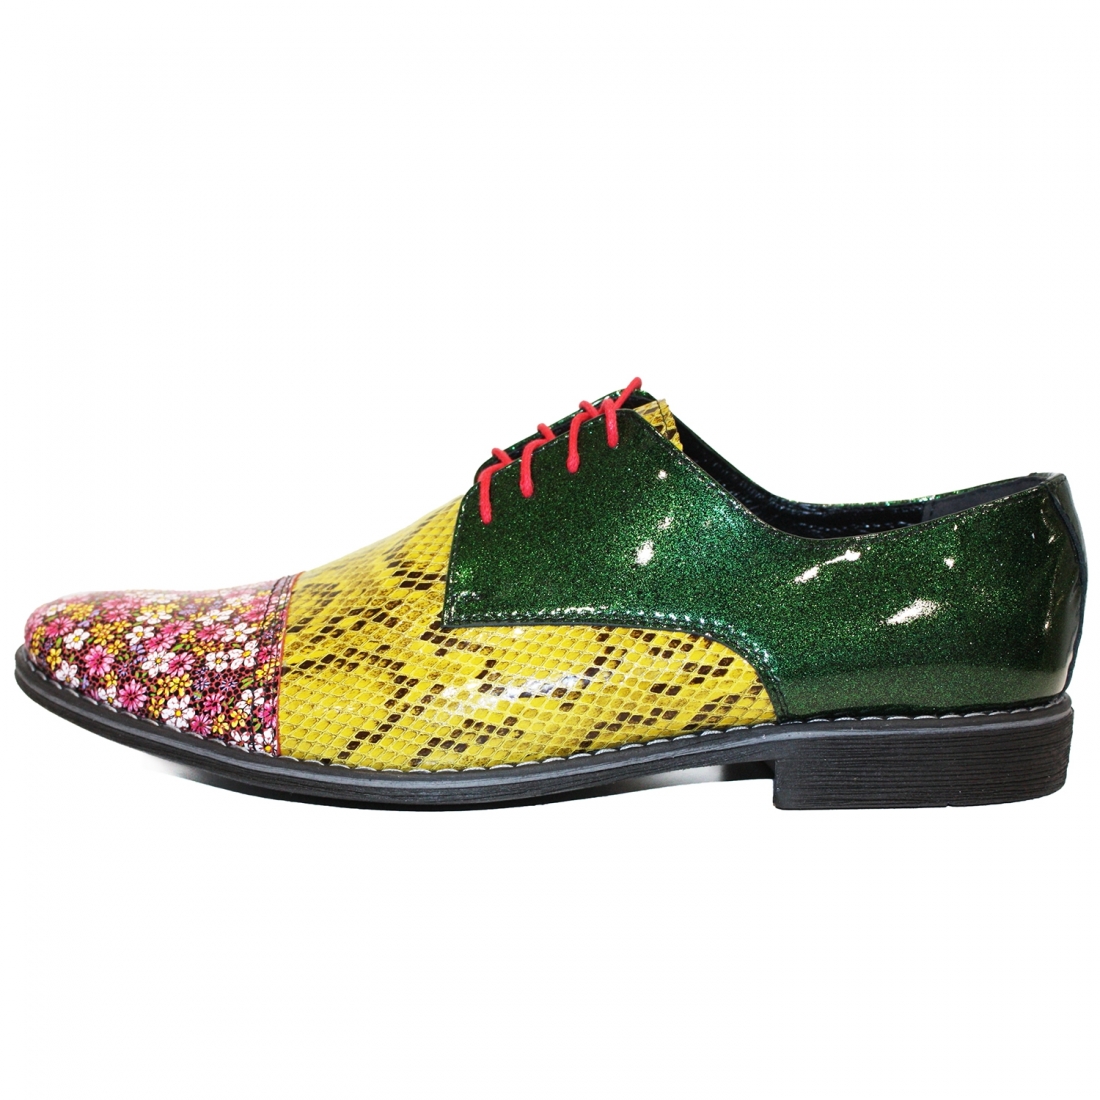 Modello Mixare - Schnürer - Handmade Colorful Italian Leather Shoes